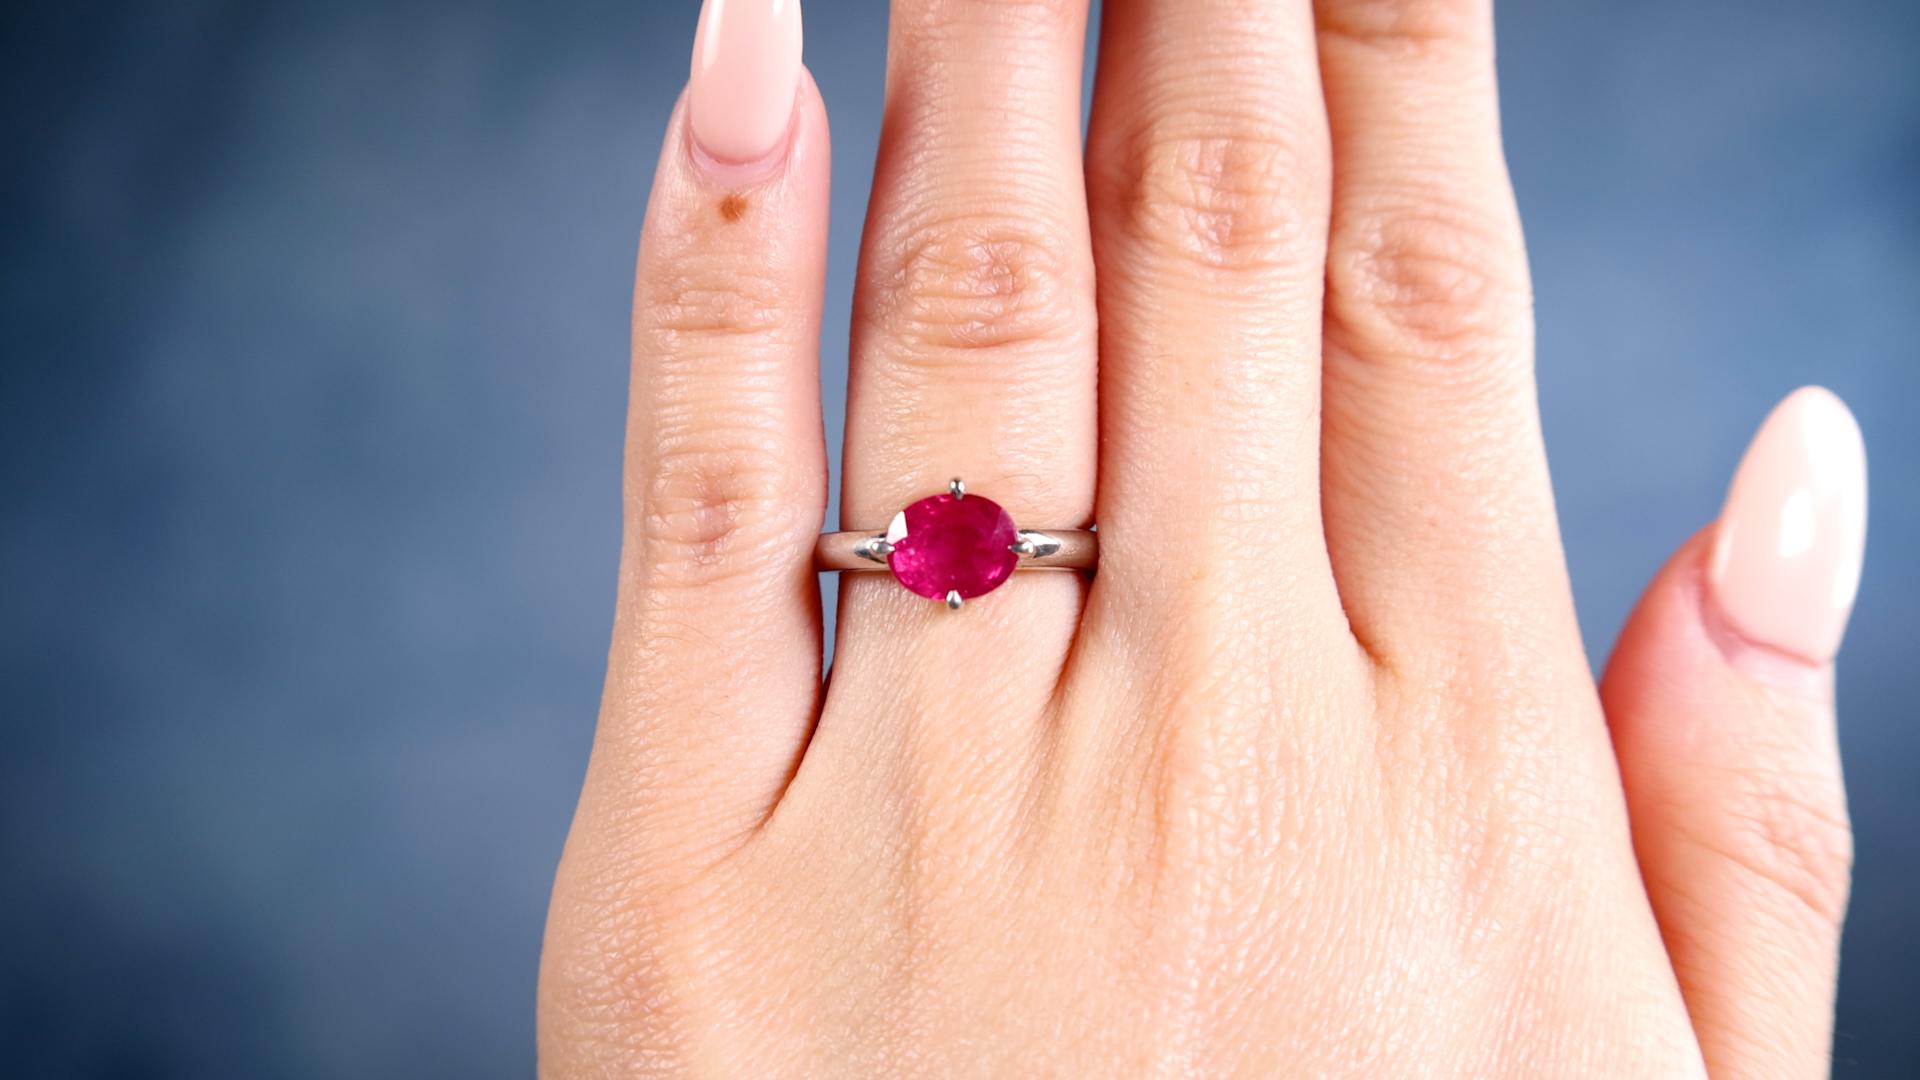 One Vintage 2.84 Carat Ruby 18k White Gold Solitaire Ring. Featuring one oval mixed cut ruby of 2.84 carats. Crafted in 18 karat white gold with purity mark and ruby weight engraved on the inside of the band. Circa 2000. The ring is a size 6 and may